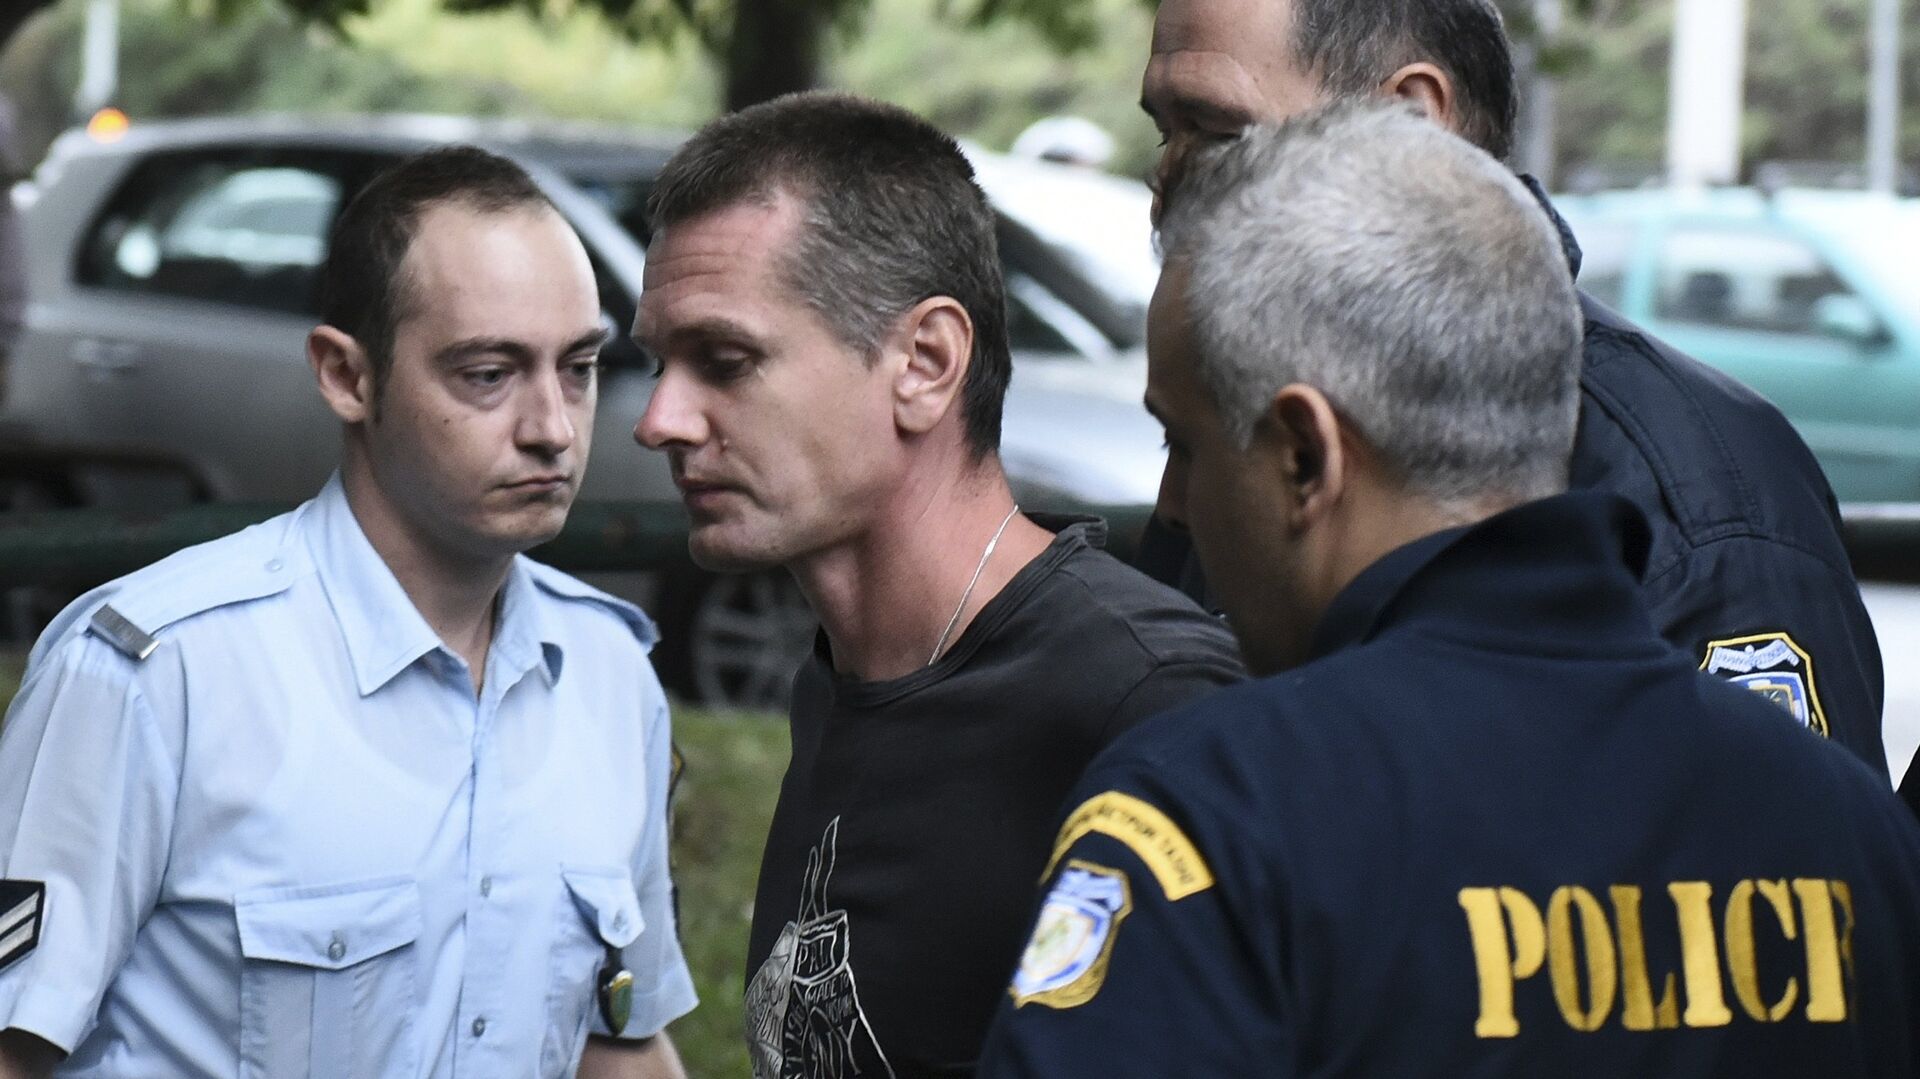 A Russian man identified as Alexander Vinnik, center, is escorted by police officers to the courthouse at the northern Greek city of Thessaloniki on Friday, Sept. 29, 2017 - Sputnik International, 1920, 05.08.2022